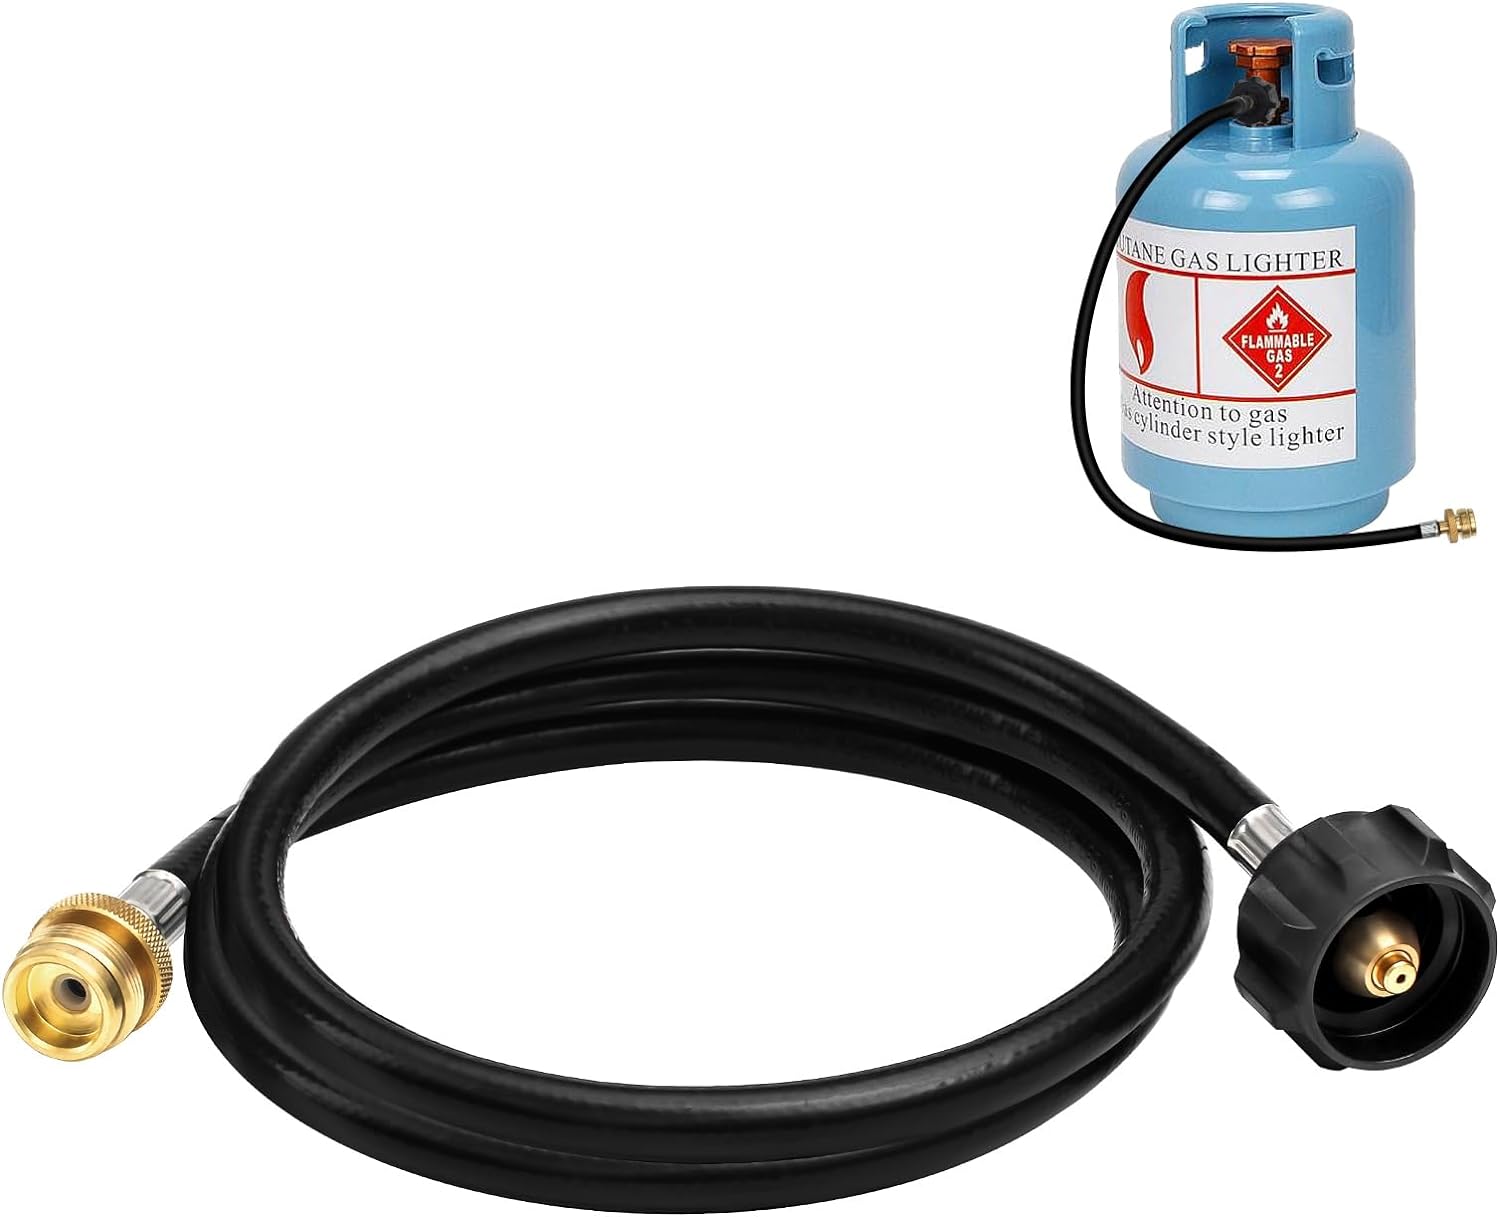 5FT Propane Adapter Hose Converter Kit 1 LB to 20 LB Propane Converter Hose for Mr Heater Buddy Coleman Camp Stove Weber Q Grill to QCC1/Type1 Propane Tank and More 1LB Portable Appliances Accessories - 5FT Propane Adapter Hose Converter Kit 1 LB To 20 LB Propane Converter Hose Review